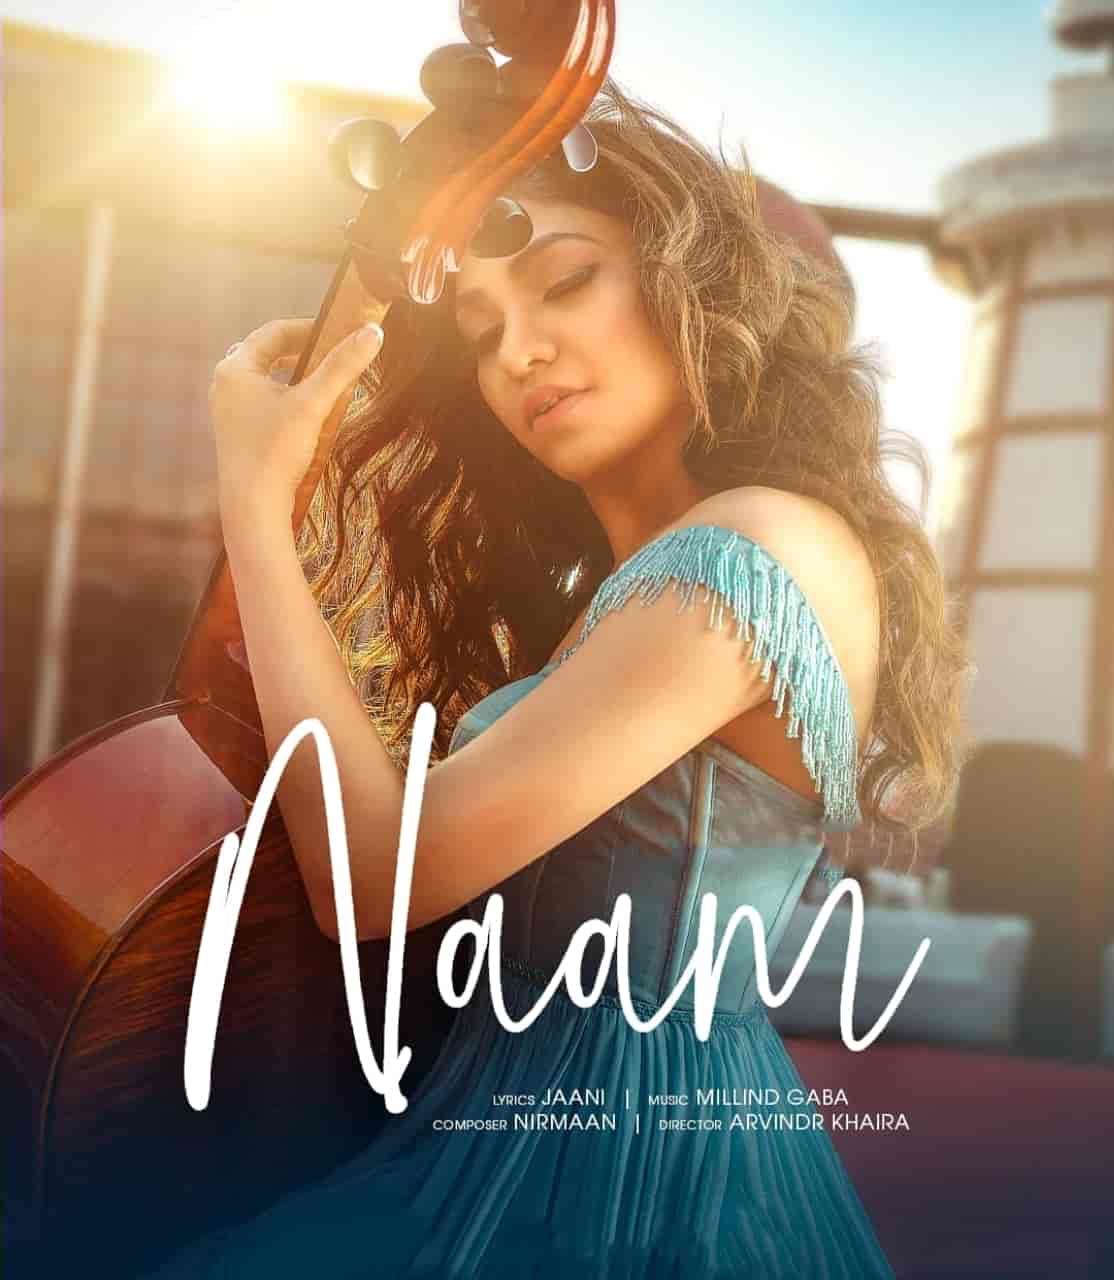 Naam Romantic Song Image By Tulsi Kumar and Millind